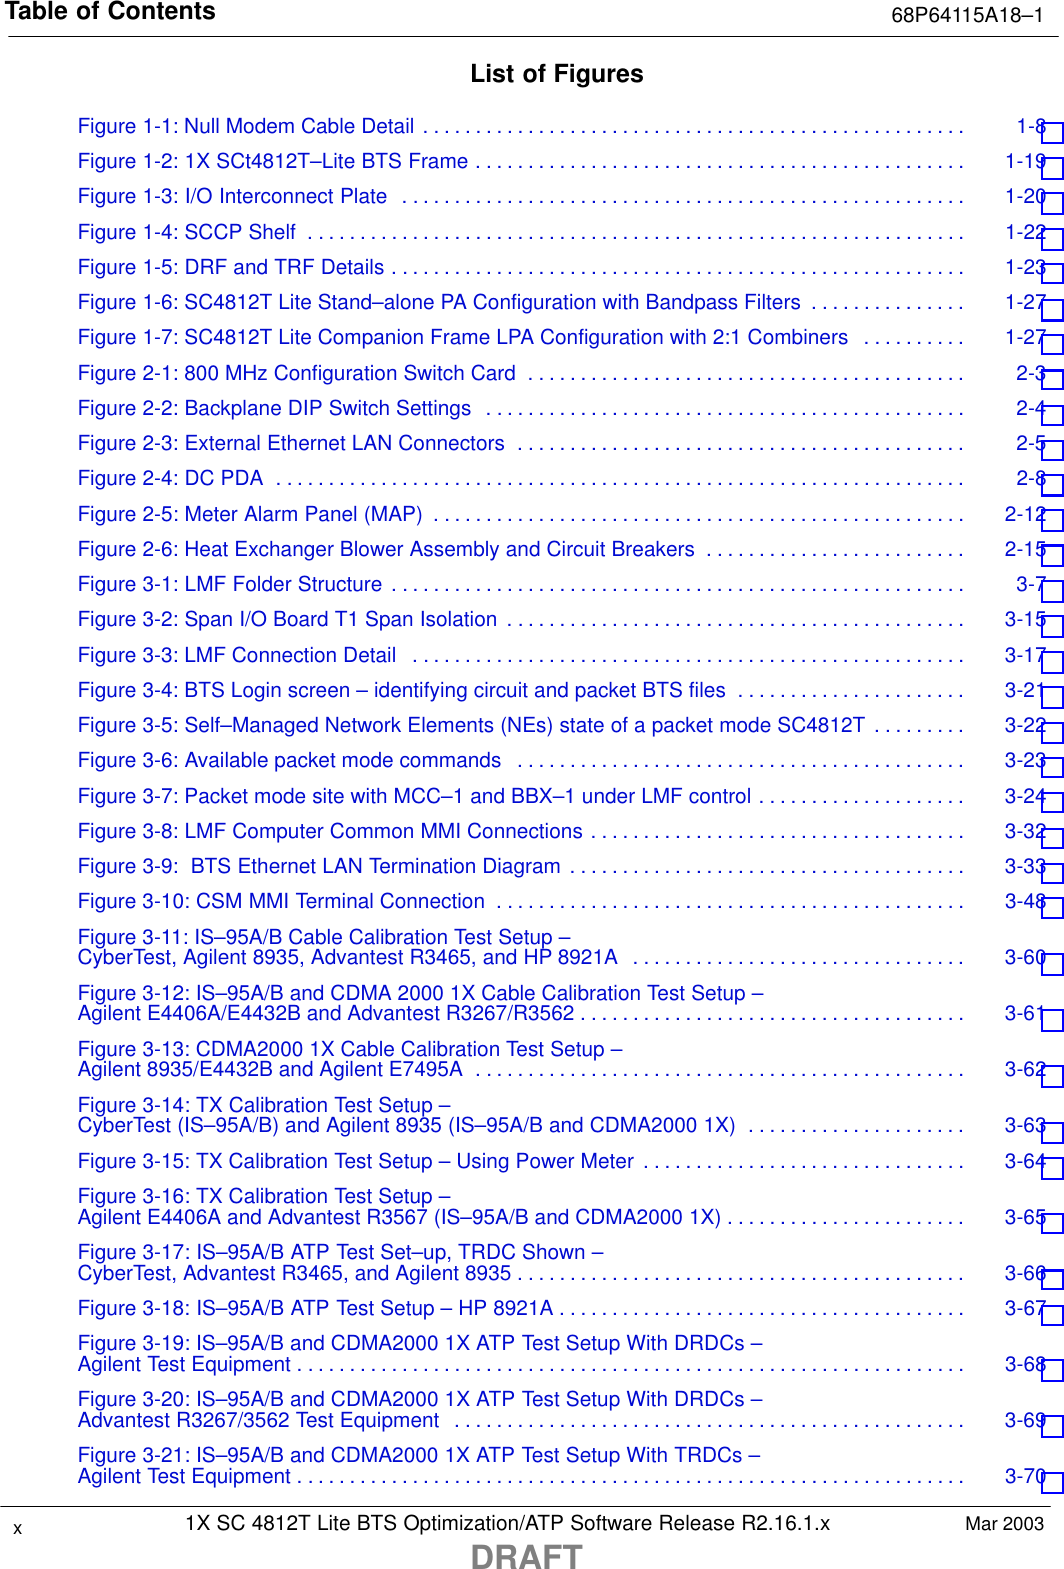 Table of Contents 68P64115A18–11X SC 4812T Lite BTS Optimization/ATP Software Release R2.16.1.xDRAFTxMar 2003List of FiguresFigure 1-1: Null Modem Cable Detail 1-8 . . . . . . . . . . . . . . . . . . . . . . . . . . . . . . . . . . . . . . . . . . . . . . . . . . . . Figure 1-2: 1X SCt4812T–Lite BTS Frame 1-19 . . . . . . . . . . . . . . . . . . . . . . . . . . . . . . . . . . . . . . . . . . . . . . . Figure 1-3: I/O Interconnect Plate 1-20 . . . . . . . . . . . . . . . . . . . . . . . . . . . . . . . . . . . . . . . . . . . . . . . . . . . . . . Figure 1-4: SCCP Shelf 1-22 . . . . . . . . . . . . . . . . . . . . . . . . . . . . . . . . . . . . . . . . . . . . . . . . . . . . . . . . . . . . . . . Figure 1-5: DRF and TRF Details 1-23 . . . . . . . . . . . . . . . . . . . . . . . . . . . . . . . . . . . . . . . . . . . . . . . . . . . . . . . Figure 1-6: SC4812T Lite Stand–alone PA Configuration with Bandpass Filters 1-27 . . . . . . . . . . . . . . . Figure 1-7: SC4812T Lite Companion Frame LPA Configuration with 2:1 Combiners 1-27 . . . . . . . . . . Figure 2-1: 800 MHz Configuration Switch Card 2-3 . . . . . . . . . . . . . . . . . . . . . . . . . . . . . . . . . . . . . . . . . . Figure 2-2: Backplane DIP Switch Settings 2-4 . . . . . . . . . . . . . . . . . . . . . . . . . . . . . . . . . . . . . . . . . . . . . . Figure 2-3: External Ethernet LAN Connectors 2-5 . . . . . . . . . . . . . . . . . . . . . . . . . . . . . . . . . . . . . . . . . . . Figure 2-4: DC PDA 2-8 . . . . . . . . . . . . . . . . . . . . . . . . . . . . . . . . . . . . . . . . . . . . . . . . . . . . . . . . . . . . . . . . . . Figure 2-5: Meter Alarm Panel (MAP) 2-12 . . . . . . . . . . . . . . . . . . . . . . . . . . . . . . . . . . . . . . . . . . . . . . . . . . . Figure 2-6: Heat Exchanger Blower Assembly and Circuit Breakers 2-15 . . . . . . . . . . . . . . . . . . . . . . . . . Figure 3-1: LMF Folder Structure 3-7 . . . . . . . . . . . . . . . . . . . . . . . . . . . . . . . . . . . . . . . . . . . . . . . . . . . . . . . Figure 3-2: Span I/O Board T1 Span Isolation 3-15 . . . . . . . . . . . . . . . . . . . . . . . . . . . . . . . . . . . . . . . . . . . . Figure 3-3: LMF Connection Detail 3-17 . . . . . . . . . . . . . . . . . . . . . . . . . . . . . . . . . . . . . . . . . . . . . . . . . . . . . Figure 3-4: BTS Login screen – identifying circuit and packet BTS files 3-21 . . . . . . . . . . . . . . . . . . . . . . Figure 3-5: Self–Managed Network Elements (NEs) state of a packet mode SC4812T 3-22 . . . . . . . . . Figure 3-6: Available packet mode commands 3-23 . . . . . . . . . . . . . . . . . . . . . . . . . . . . . . . . . . . . . . . . . . . Figure 3-7: Packet mode site with MCC–1 and BBX–1 under LMF control 3-24 . . . . . . . . . . . . . . . . . . . . Figure 3-8: LMF Computer Common MMI Connections 3-32 . . . . . . . . . . . . . . . . . . . . . . . . . . . . . . . . . . . . Figure 3-9:  BTS Ethernet LAN Termination Diagram 3-33 . . . . . . . . . . . . . . . . . . . . . . . . . . . . . . . . . . . . . . Figure 3-10: CSM MMI Terminal Connection 3-48 . . . . . . . . . . . . . . . . . . . . . . . . . . . . . . . . . . . . . . . . . . . . . Figure 3-11: IS–95A/B Cable Calibration Test Setup – CyberTest, Agilent 8935, Advantest R3465, and HP 8921A 3-60 . . . . . . . . . . . . . . . . . . . . . . . . . . . . . . . . Figure 3-12: IS–95A/B and CDMA 2000 1X Cable Calibration Test Setup –Agilent E4406A/E4432B and Advantest R3267/R3562 3-61 . . . . . . . . . . . . . . . . . . . . . . . . . . . . . . . . . . . . . Figure 3-13: CDMA2000 1X Cable Calibration Test Setup – Agilent 8935/E4432B and Agilent E7495A 3-62 . . . . . . . . . . . . . . . . . . . . . . . . . . . . . . . . . . . . . . . . . . . . . . . Figure 3-14: TX Calibration Test Setup –CyberTest (IS–95A/B) and Agilent 8935 (IS–95A/B and CDMA2000 1X) 3-63 . . . . . . . . . . . . . . . . . . . . . Figure 3-15: TX Calibration Test Setup – Using Power Meter 3-64 . . . . . . . . . . . . . . . . . . . . . . . . . . . . . . . Figure 3-16: TX Calibration Test Setup – Agilent E4406A and Advantest R3567 (IS–95A/B and CDMA2000 1X) 3-65 . . . . . . . . . . . . . . . . . . . . . . . Figure 3-17: IS–95A/B ATP Test Set–up, TRDC Shown – CyberTest, Advantest R3465, and Agilent 8935 3-66 . . . . . . . . . . . . . . . . . . . . . . . . . . . . . . . . . . . . . . . . . . . Figure 3-18: IS–95A/B ATP Test Setup – HP 8921A 3-67 . . . . . . . . . . . . . . . . . . . . . . . . . . . . . . . . . . . . . . . Figure 3-19: IS–95A/B and CDMA2000 1X ATP Test Setup With DRDCs – Agilent Test Equipment 3-68 . . . . . . . . . . . . . . . . . . . . . . . . . . . . . . . . . . . . . . . . . . . . . . . . . . . . . . . . . . . . . . . . Figure 3-20: IS–95A/B and CDMA2000 1X ATP Test Setup With DRDCs – Advantest R3267/3562 Test Equipment 3-69 . . . . . . . . . . . . . . . . . . . . . . . . . . . . . . . . . . . . . . . . . . . . . . . . . Figure 3-21: IS–95A/B and CDMA2000 1X ATP Test Setup With TRDCs – Agilent Test Equipment 3-70 . . . . . . . . . . . . . . . . . . . . . . . . . . . . . . . . . . . . . . . . . . . . . . . . . . . . . . . . . . . . . . . . 